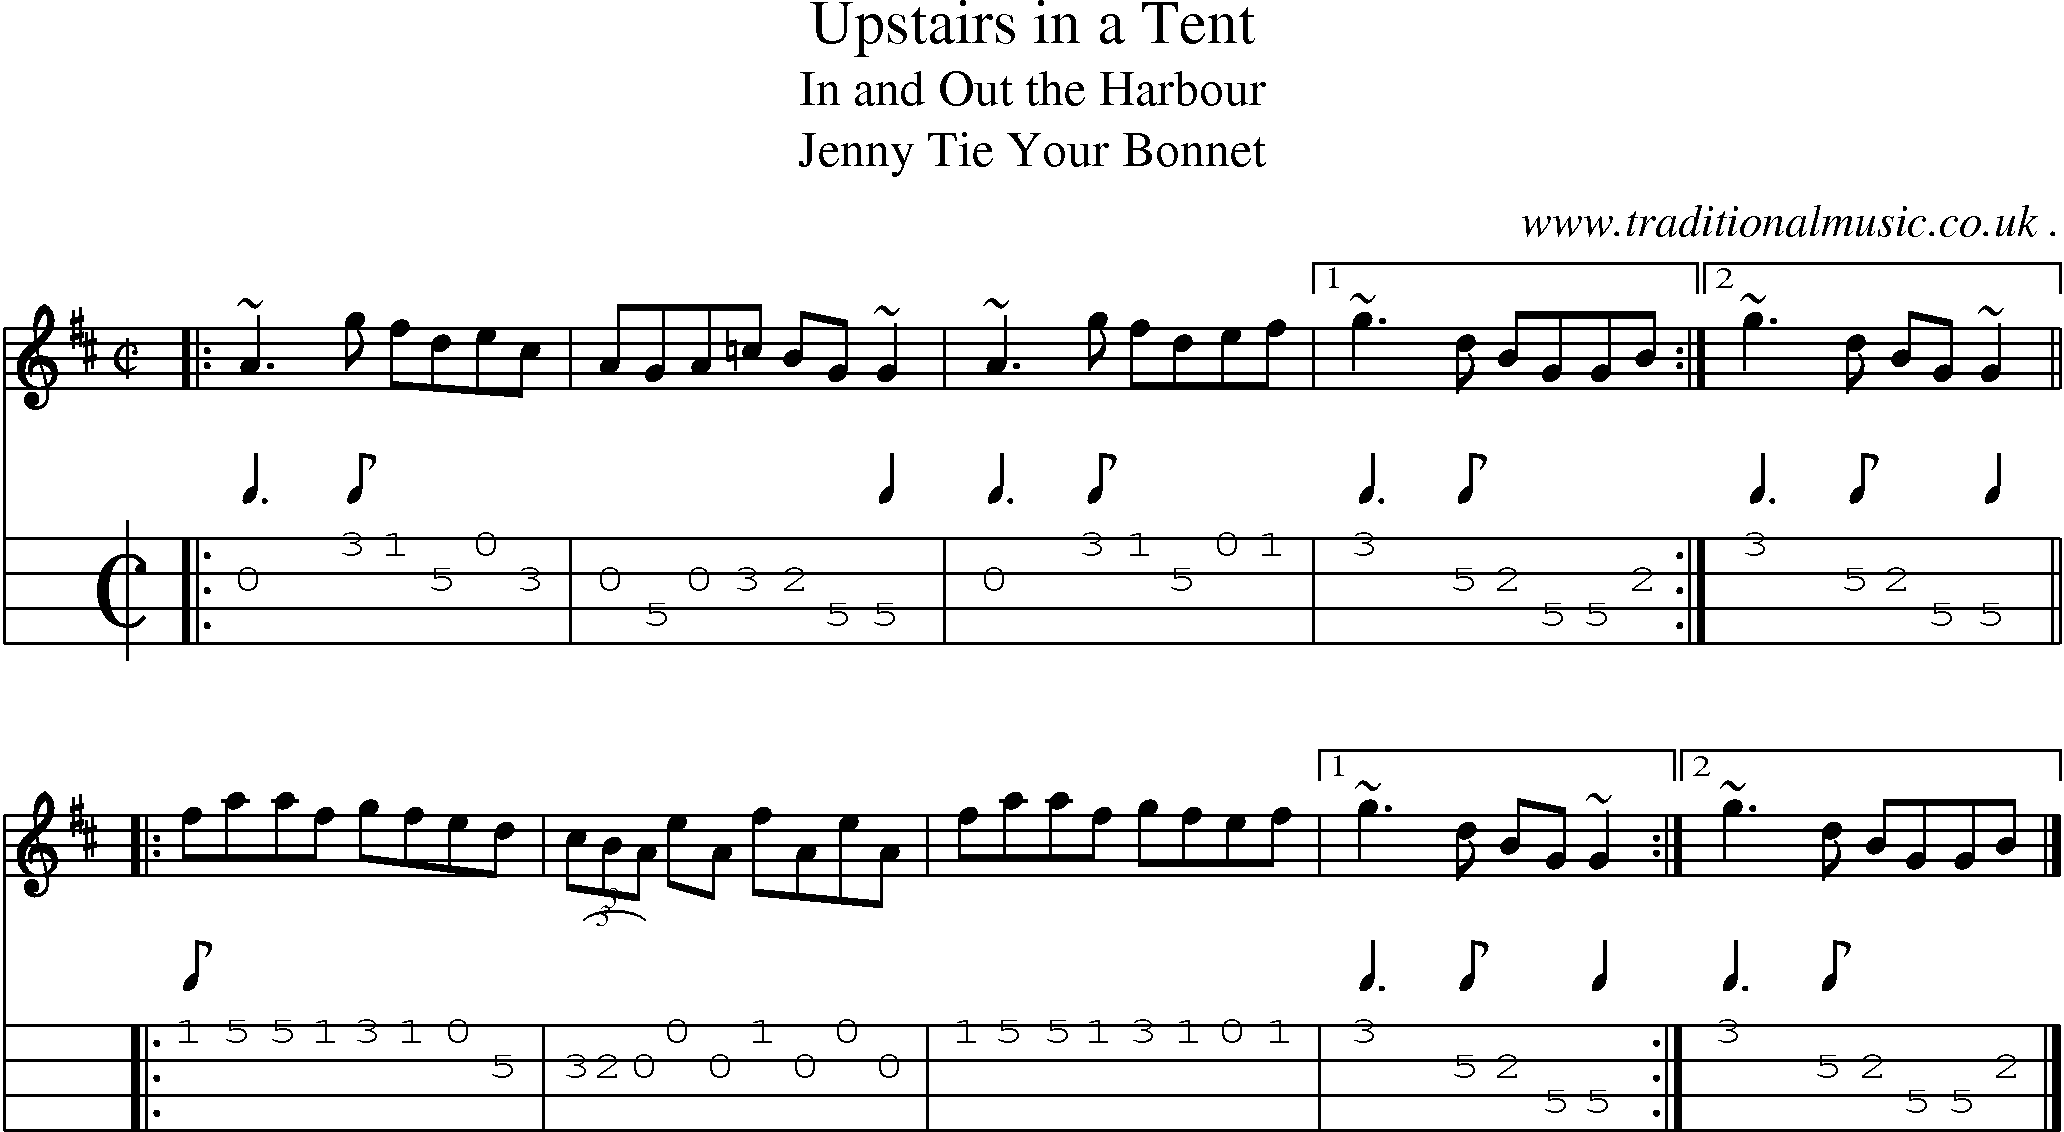 Sheet-music  score, Chords and Mandolin Tabs for Upstairs In A Tent